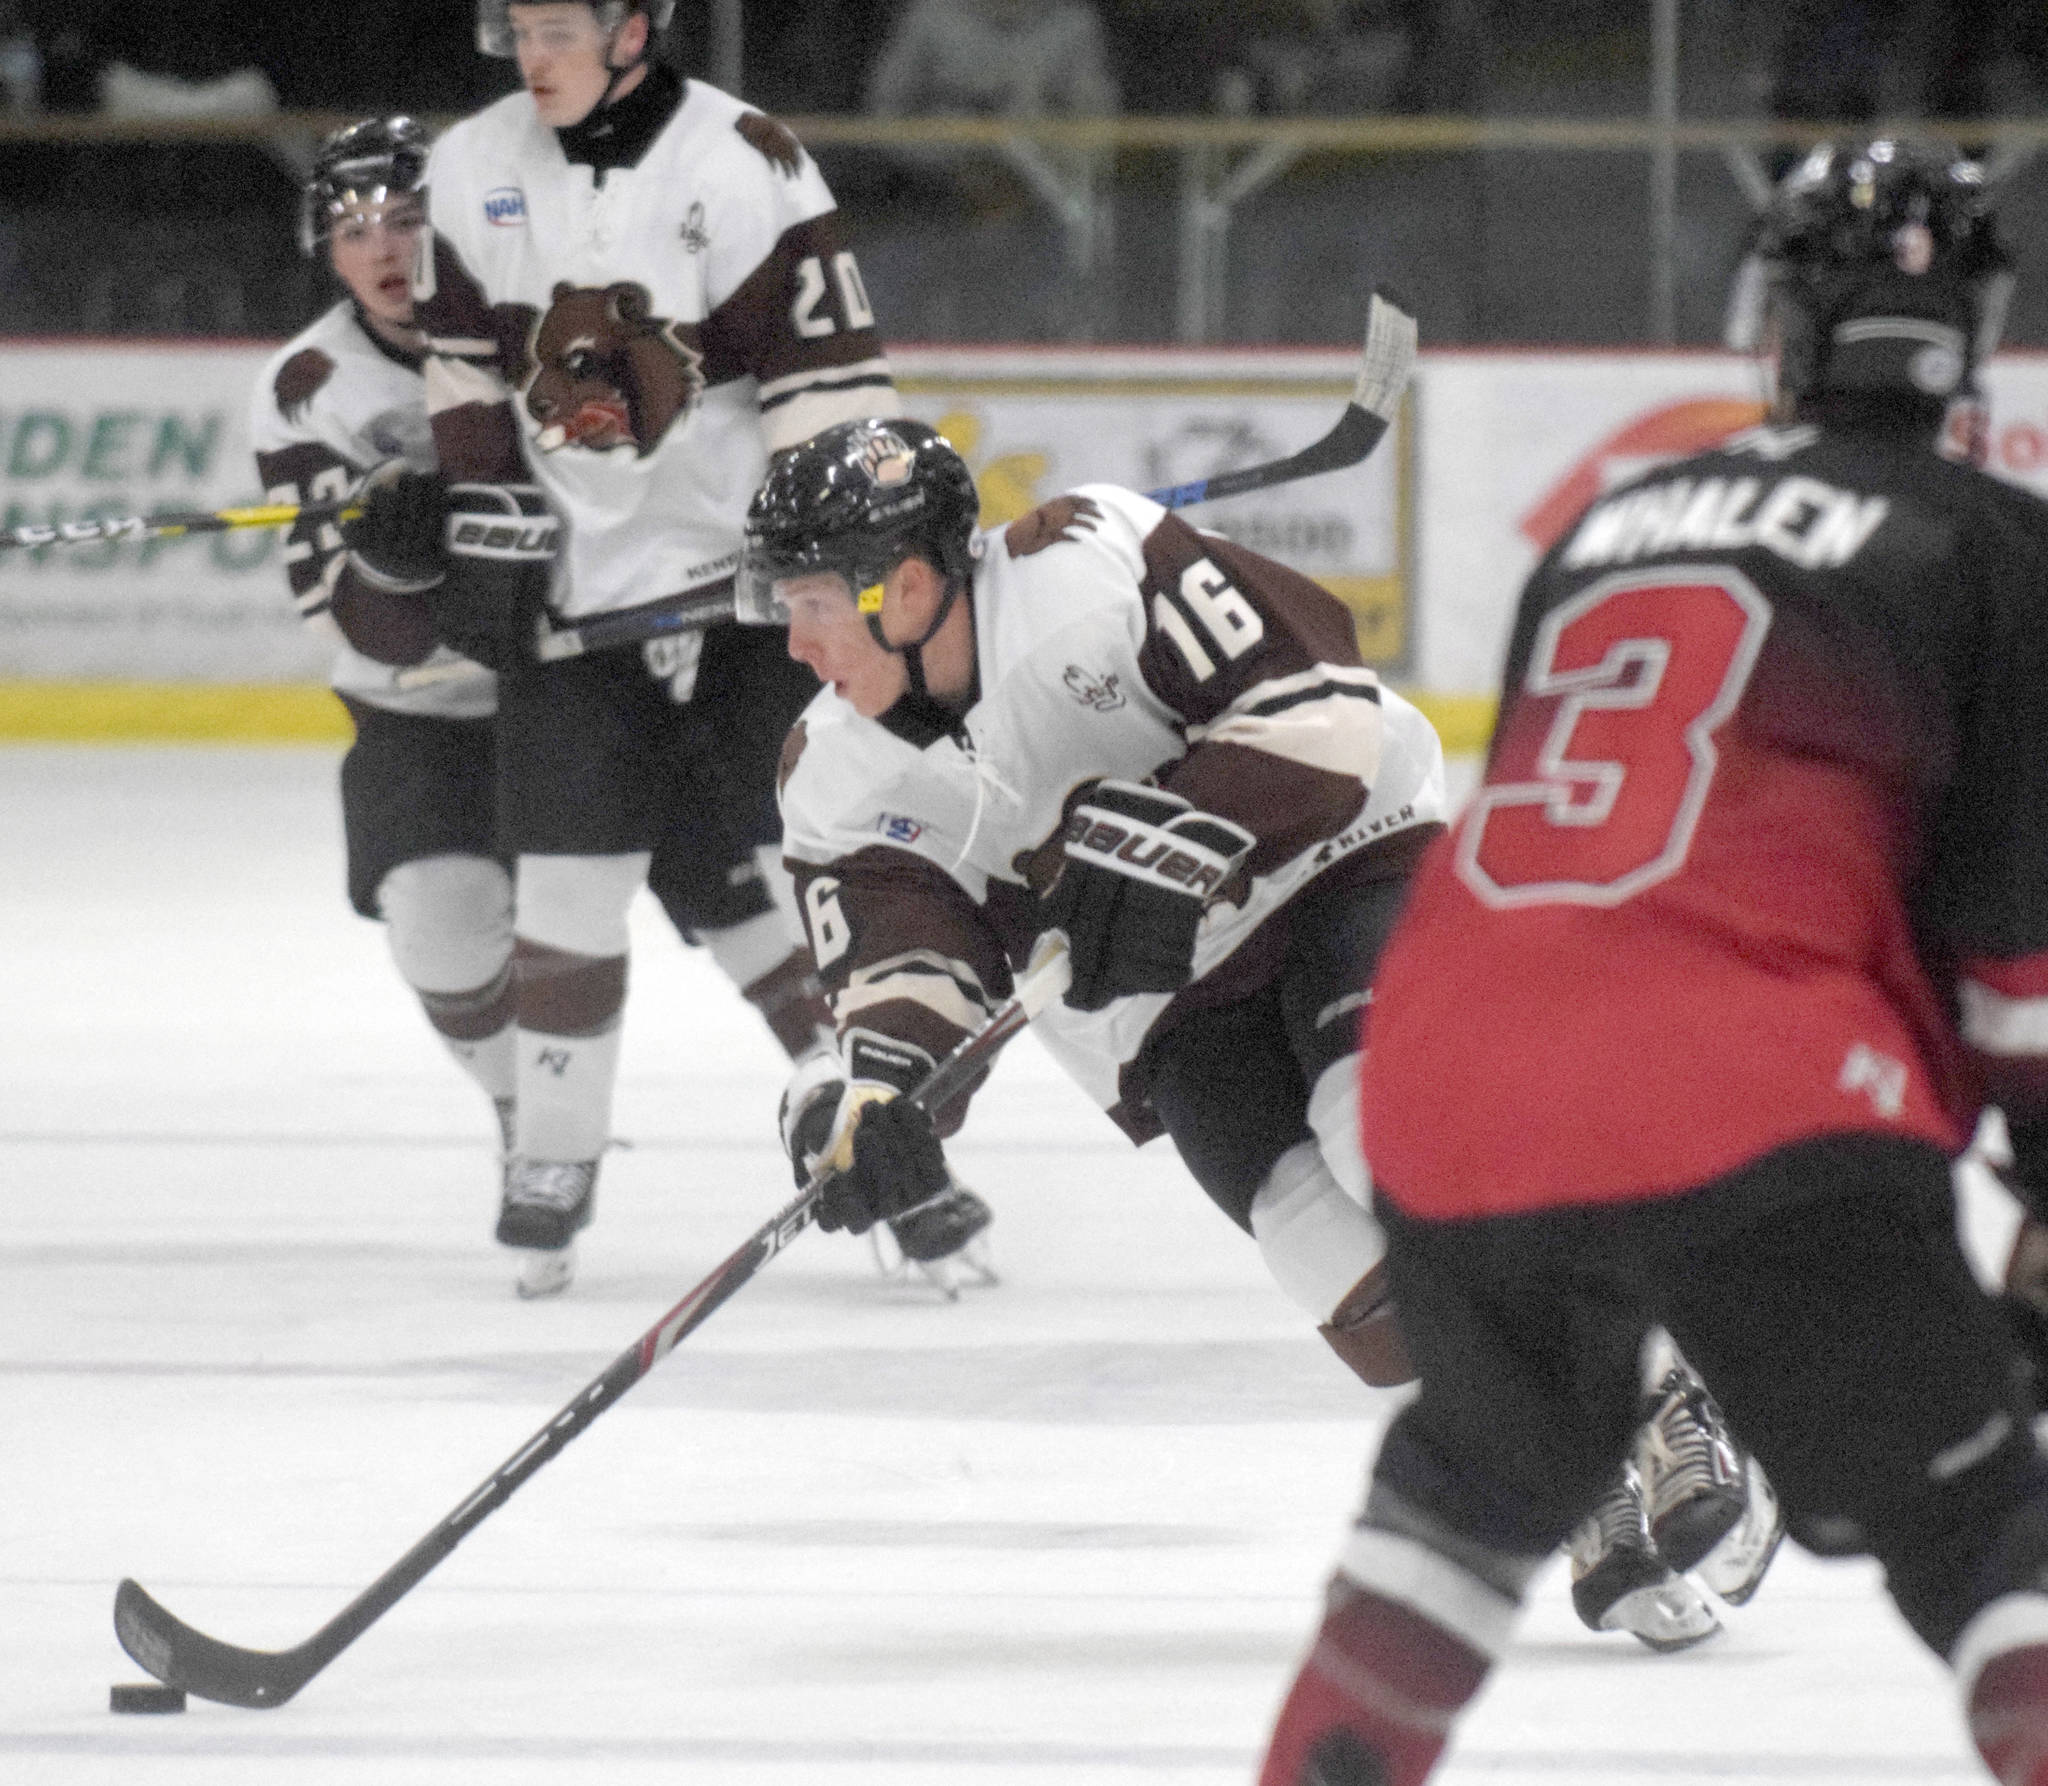 Kenai River Brown Bears forward Theo Thrun brings the puck up the ice on Friday, Oct. 18, 2019, against the Minnesota Magicians at the Soldotna Regional Sports Complex in Soldotna, Alaska. (Photo by Jeff Helminiak/Peninsula Clarion)